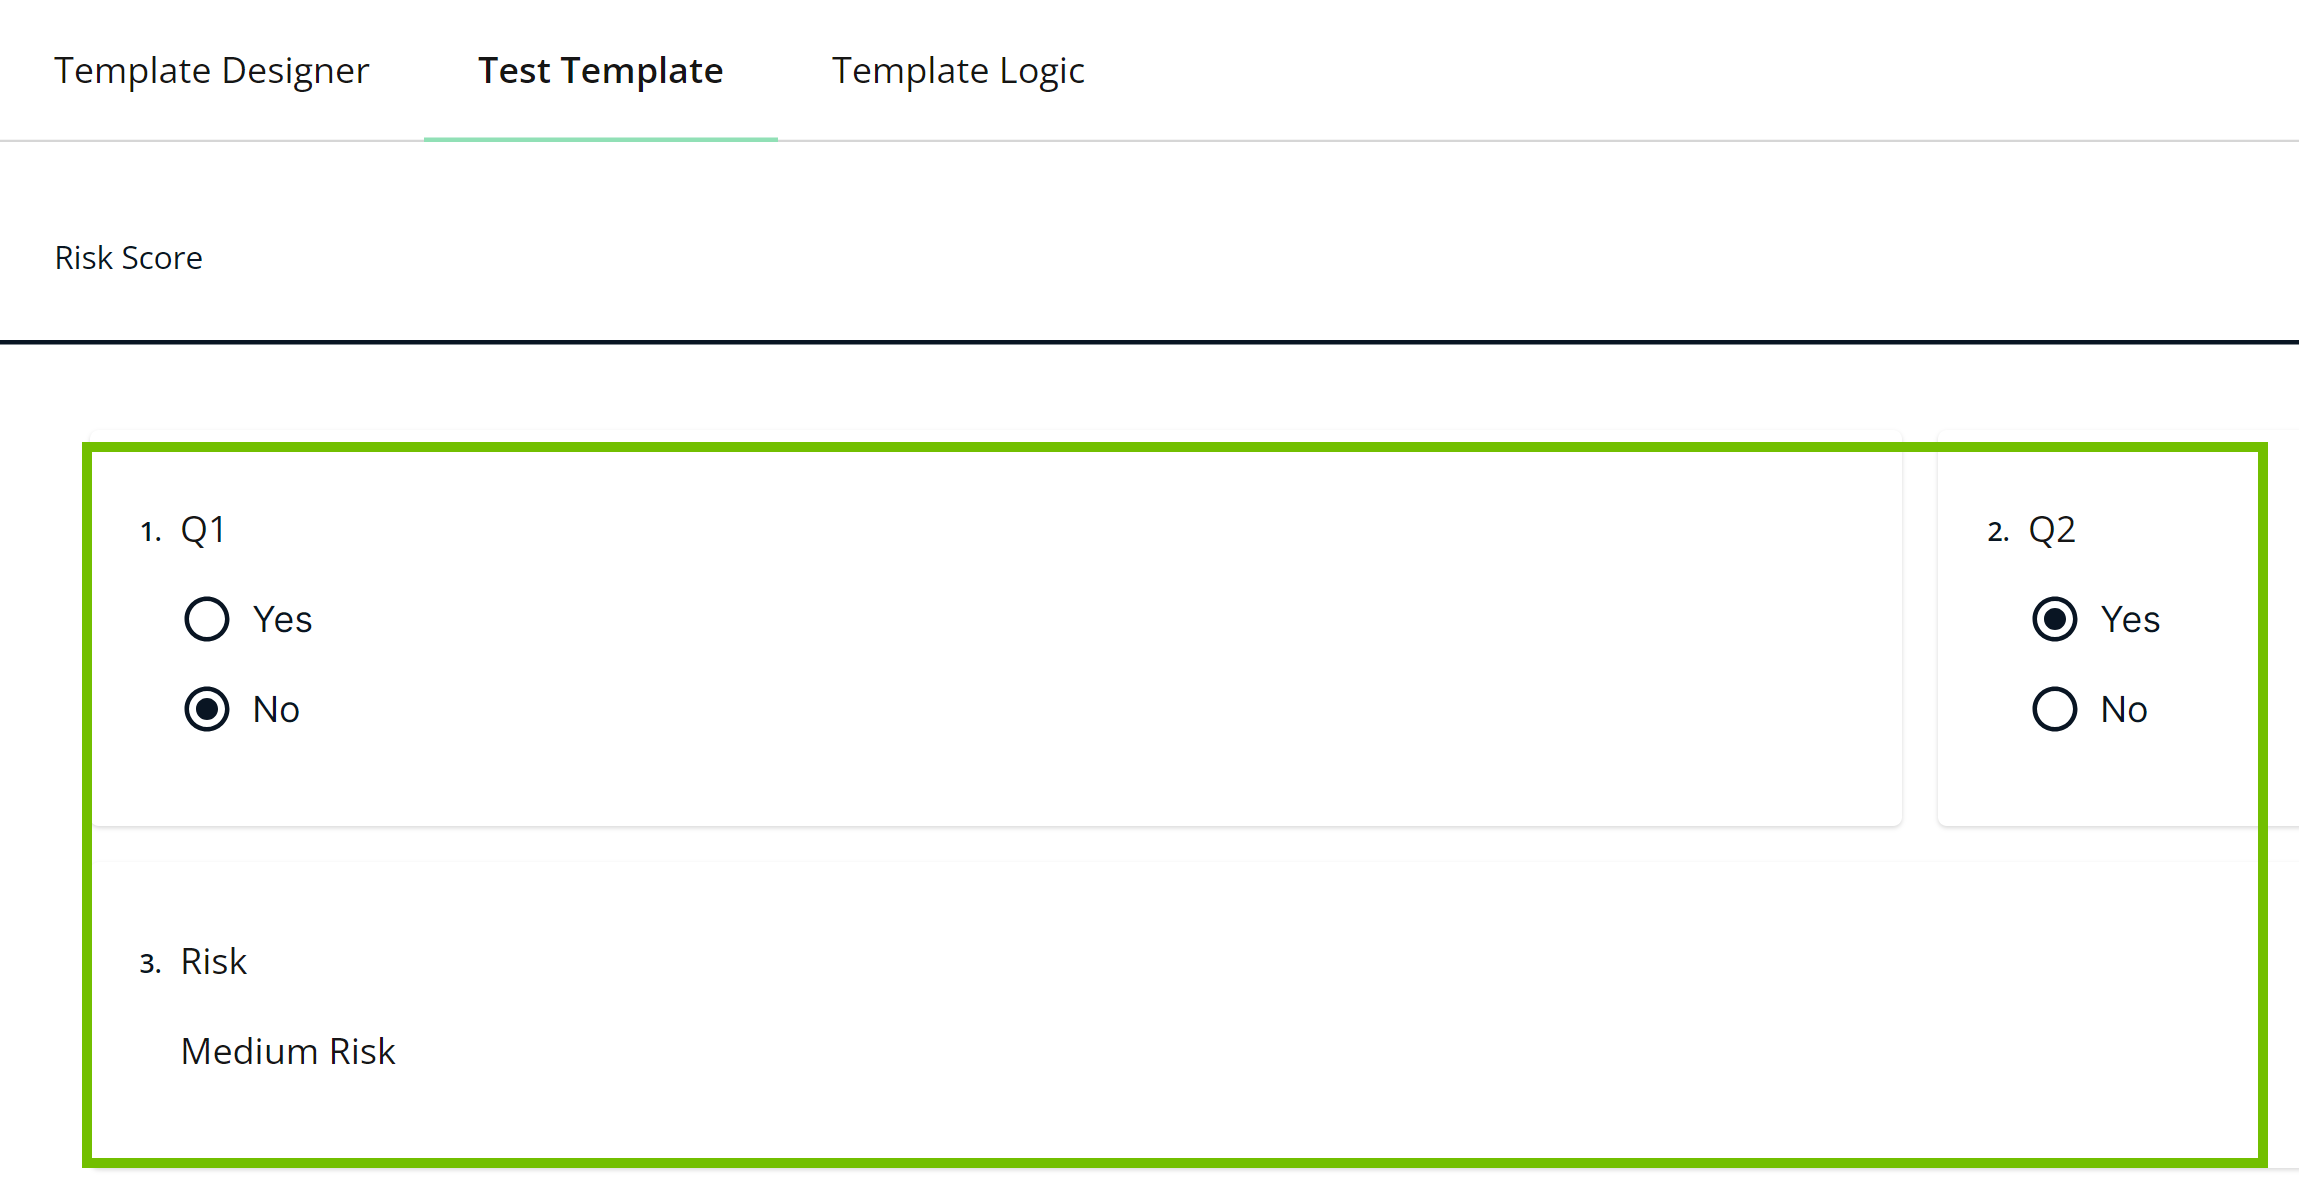 Image of the Test Template tab